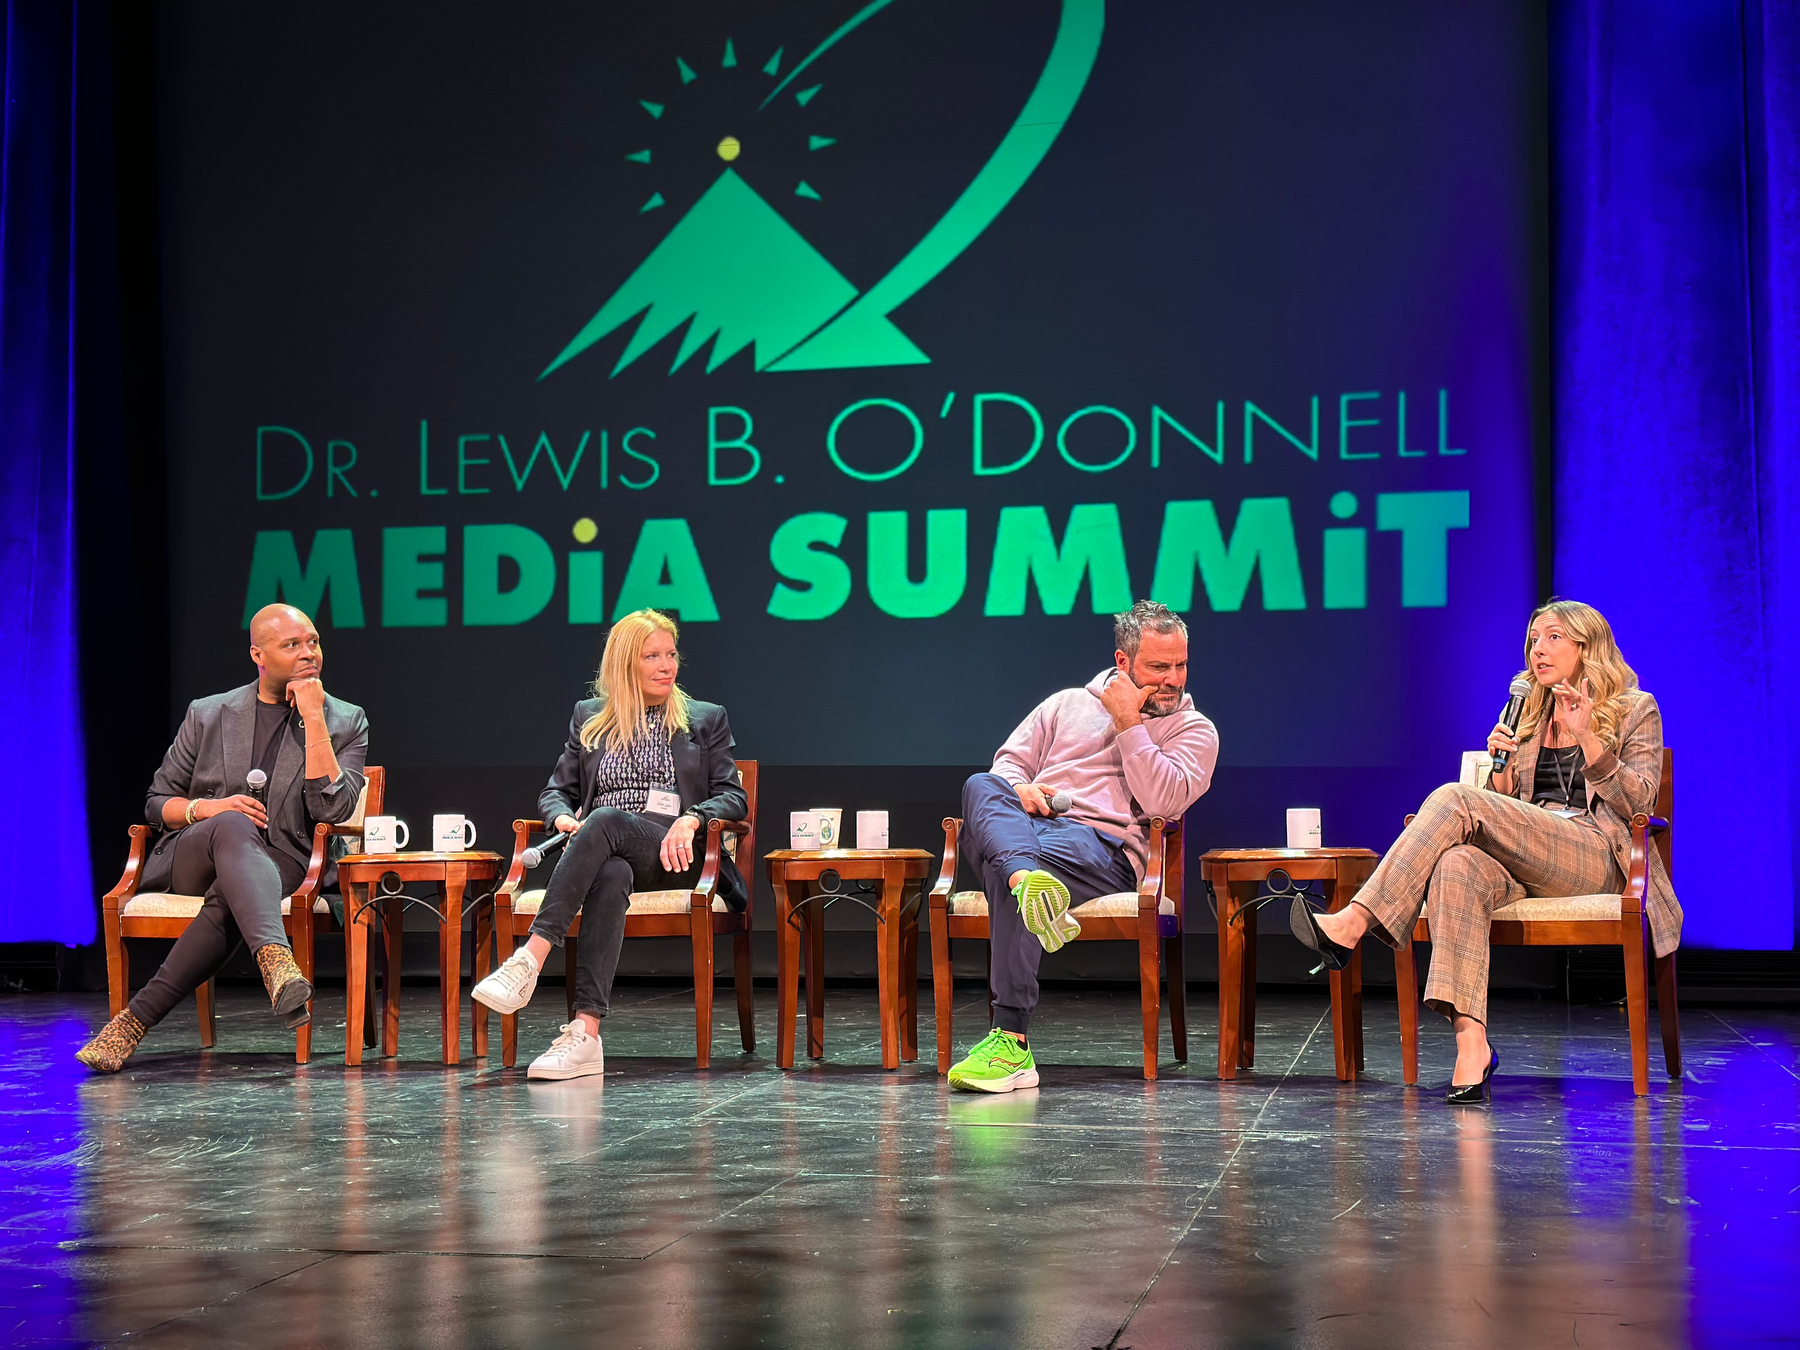 This year’s Dr. Lewis B. O’Donnell Media Summit featured four successful panelists who discussed their experiences being “Behind the Scenes in Hollywood” – the theme of this year’s event. Shown are four people on the all-star panel.